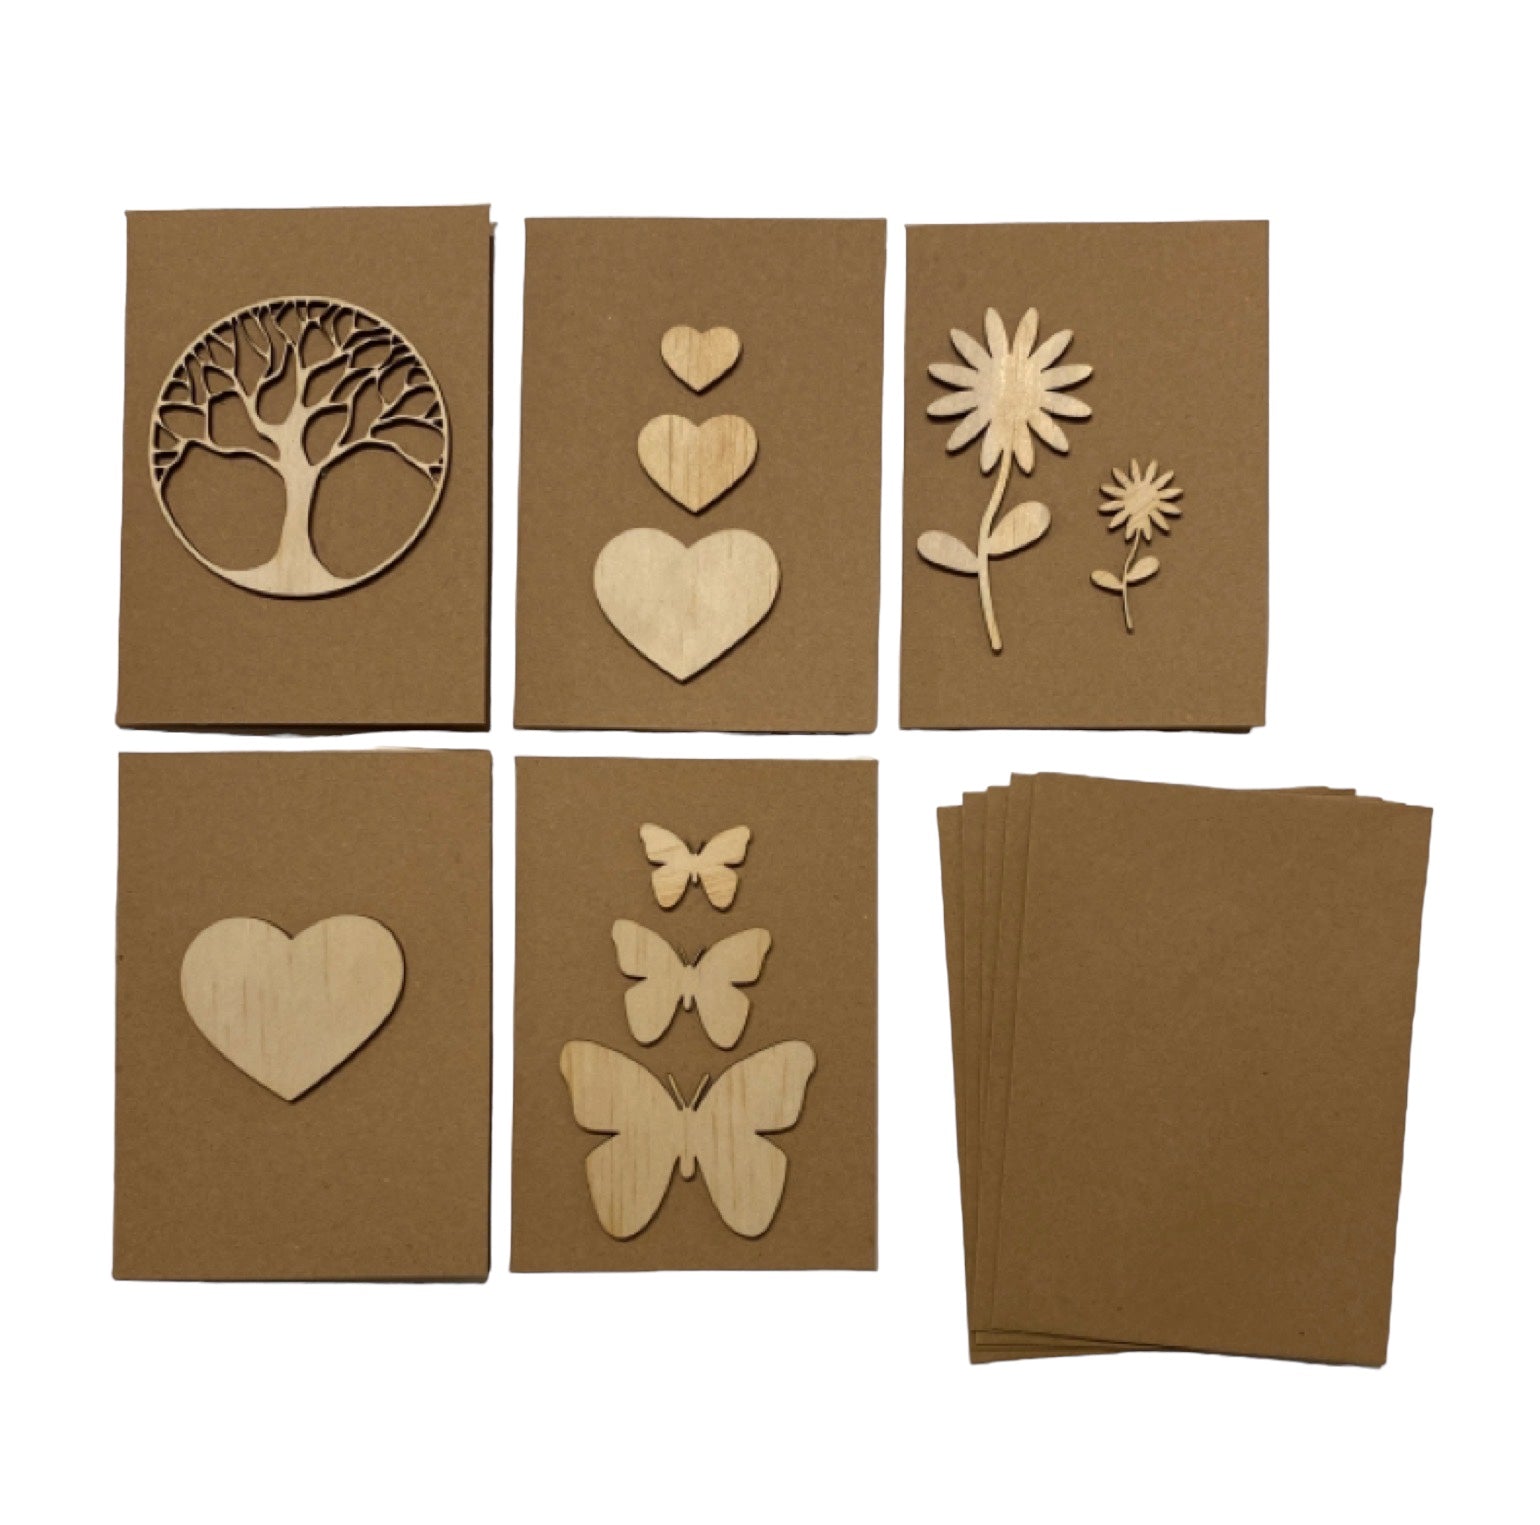 Card Envelope Greeting Set of 5 Occasions - The Renmy Store Homewares & Gifts 